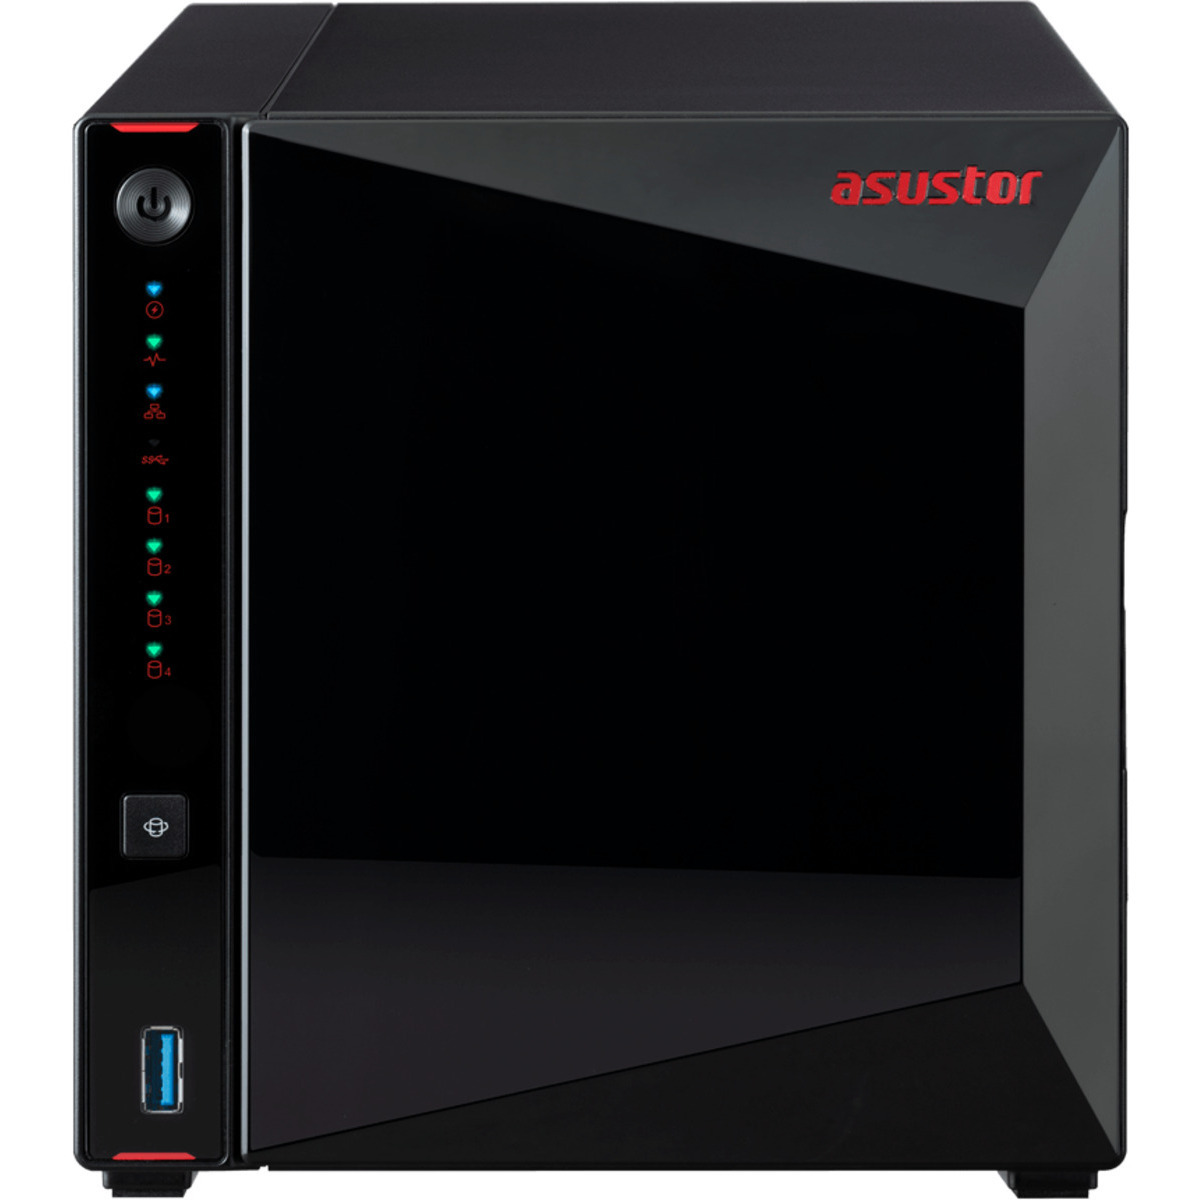 ASUSTOR AS5304T Nimbustor 40tb 4-Bay Desktop Multimedia / Power User / Business NAS - Network Attached Storage Device 4x10tb Seagate IronWolf Pro ST10000NT001 3.5 7200rpm SATA 6Gb/s HDD NAS Class Drives Installed - Burn-In Tested - ON SALE - FREE RAM UPGRADE AS5304T Nimbustor